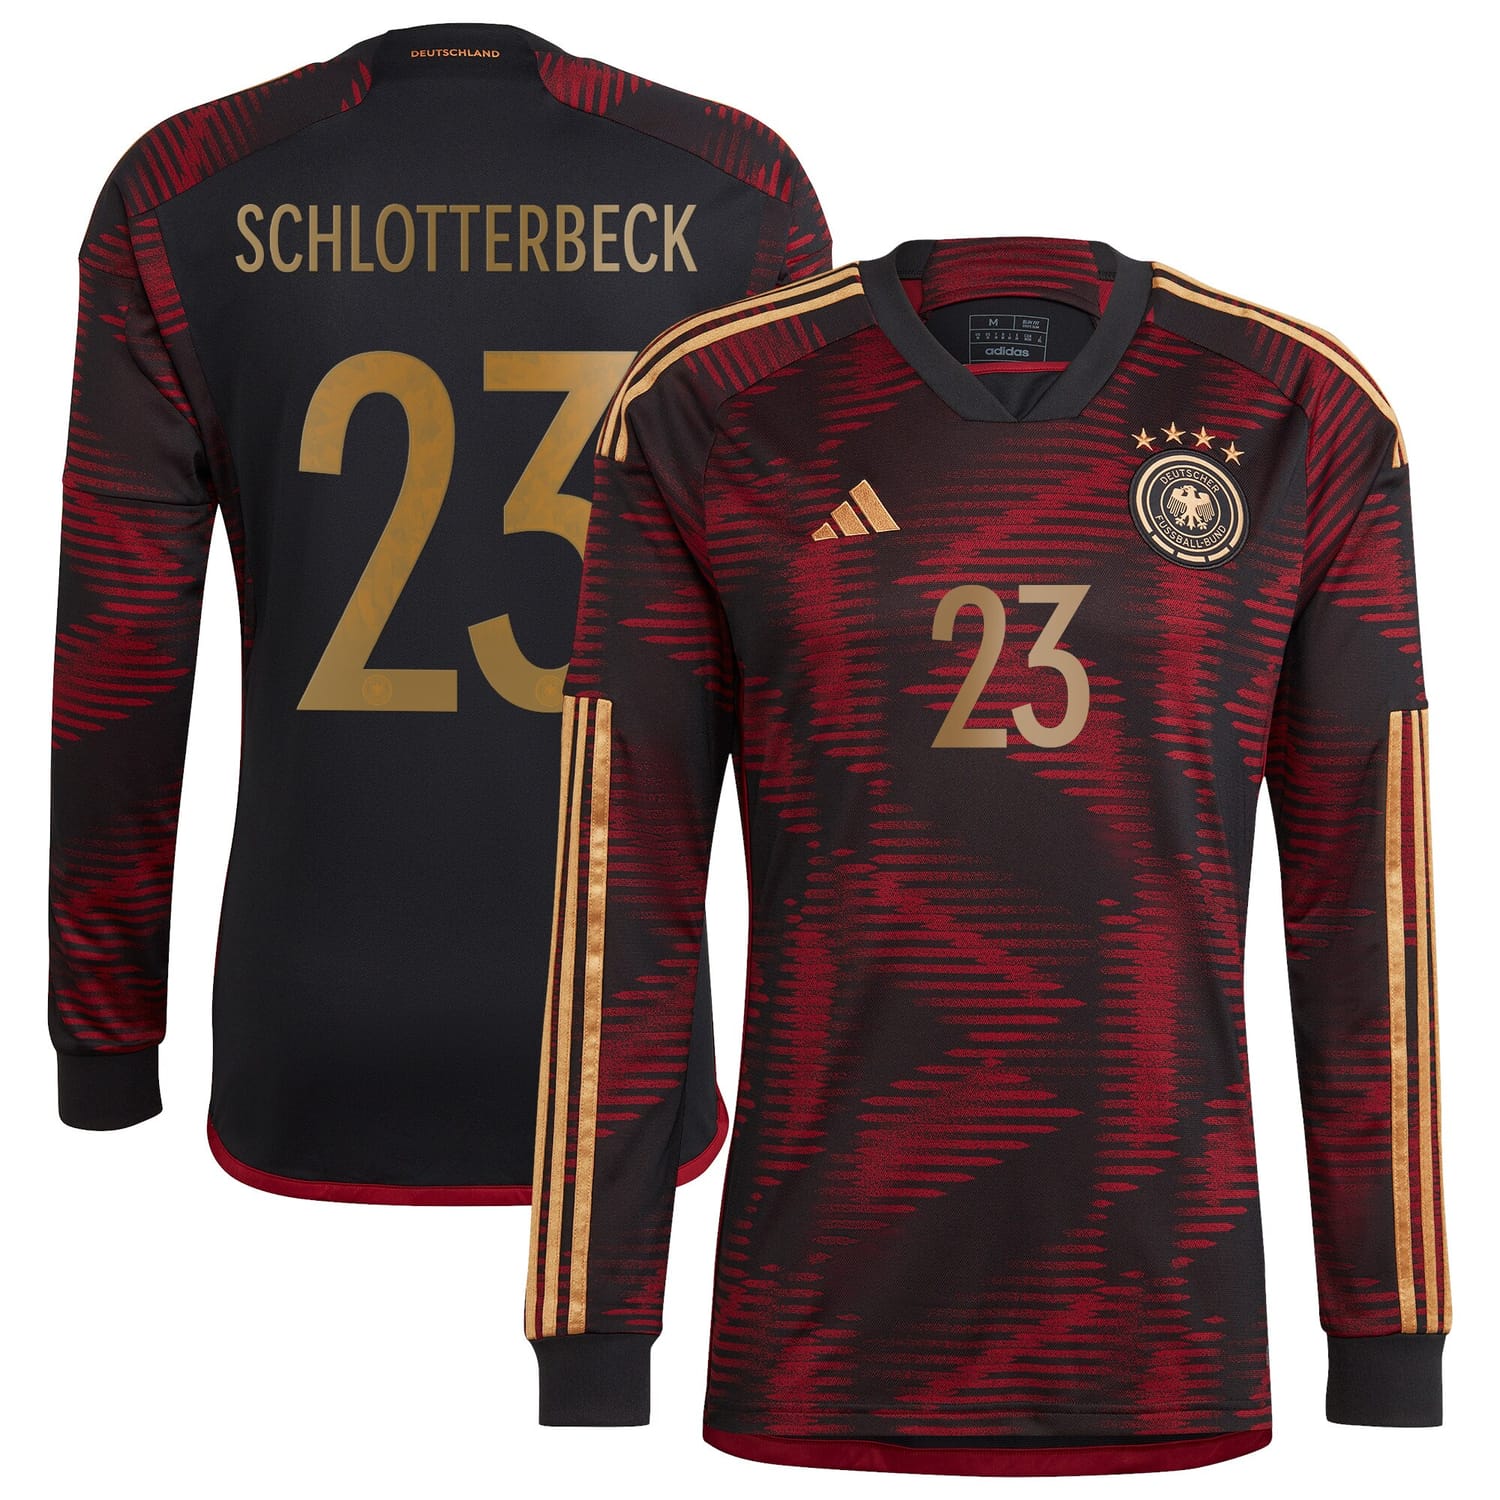 Germany National Team Away Jersey Shirt Long Sleeve player Nico Schlotterbeck 23 printing for Men